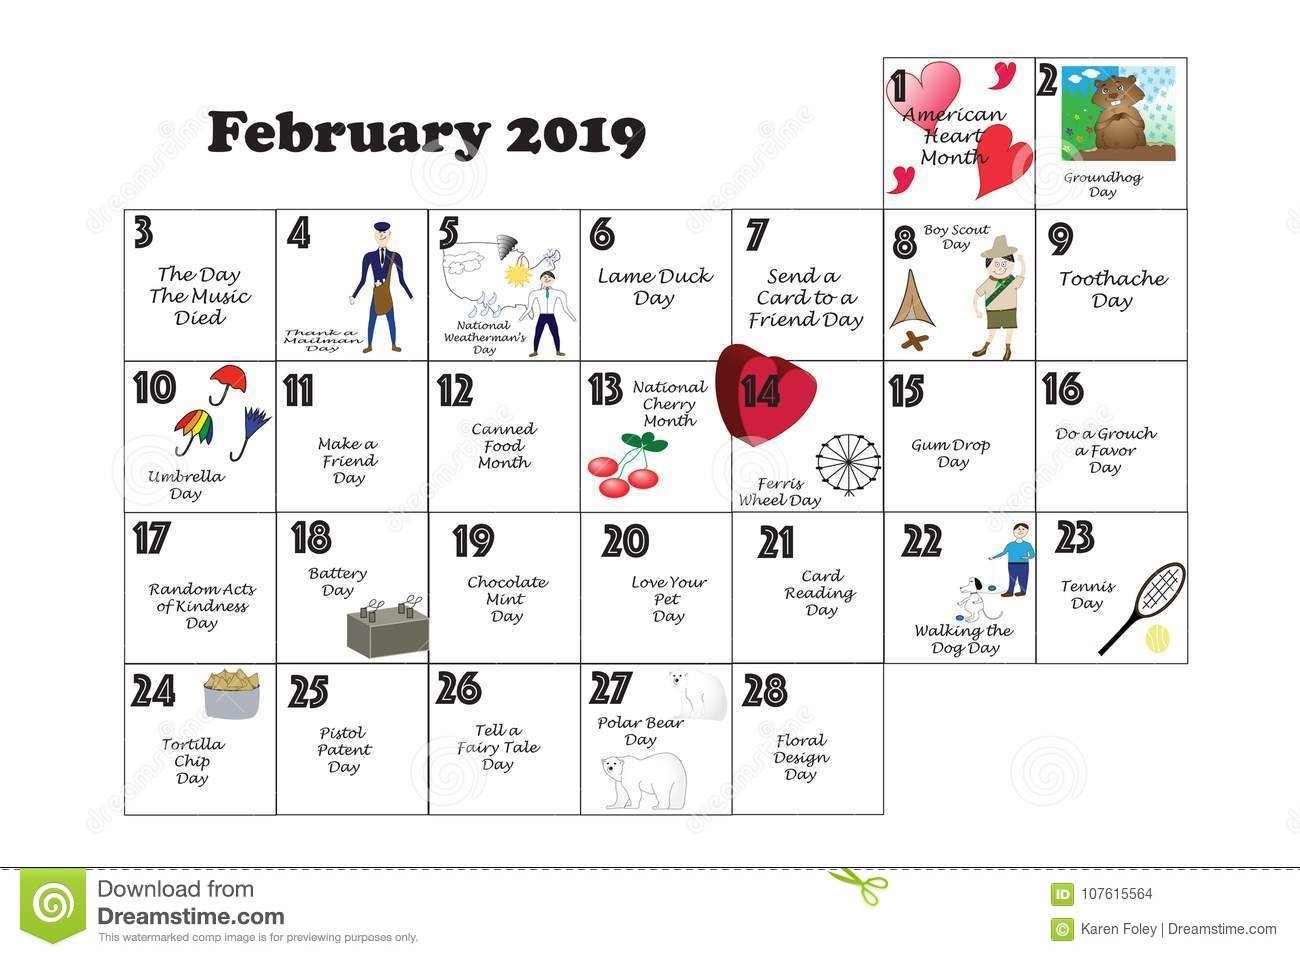 February Quirky Holidays And Unusual Events 2019 Stock Illustration Calendar Of Holidays And Events